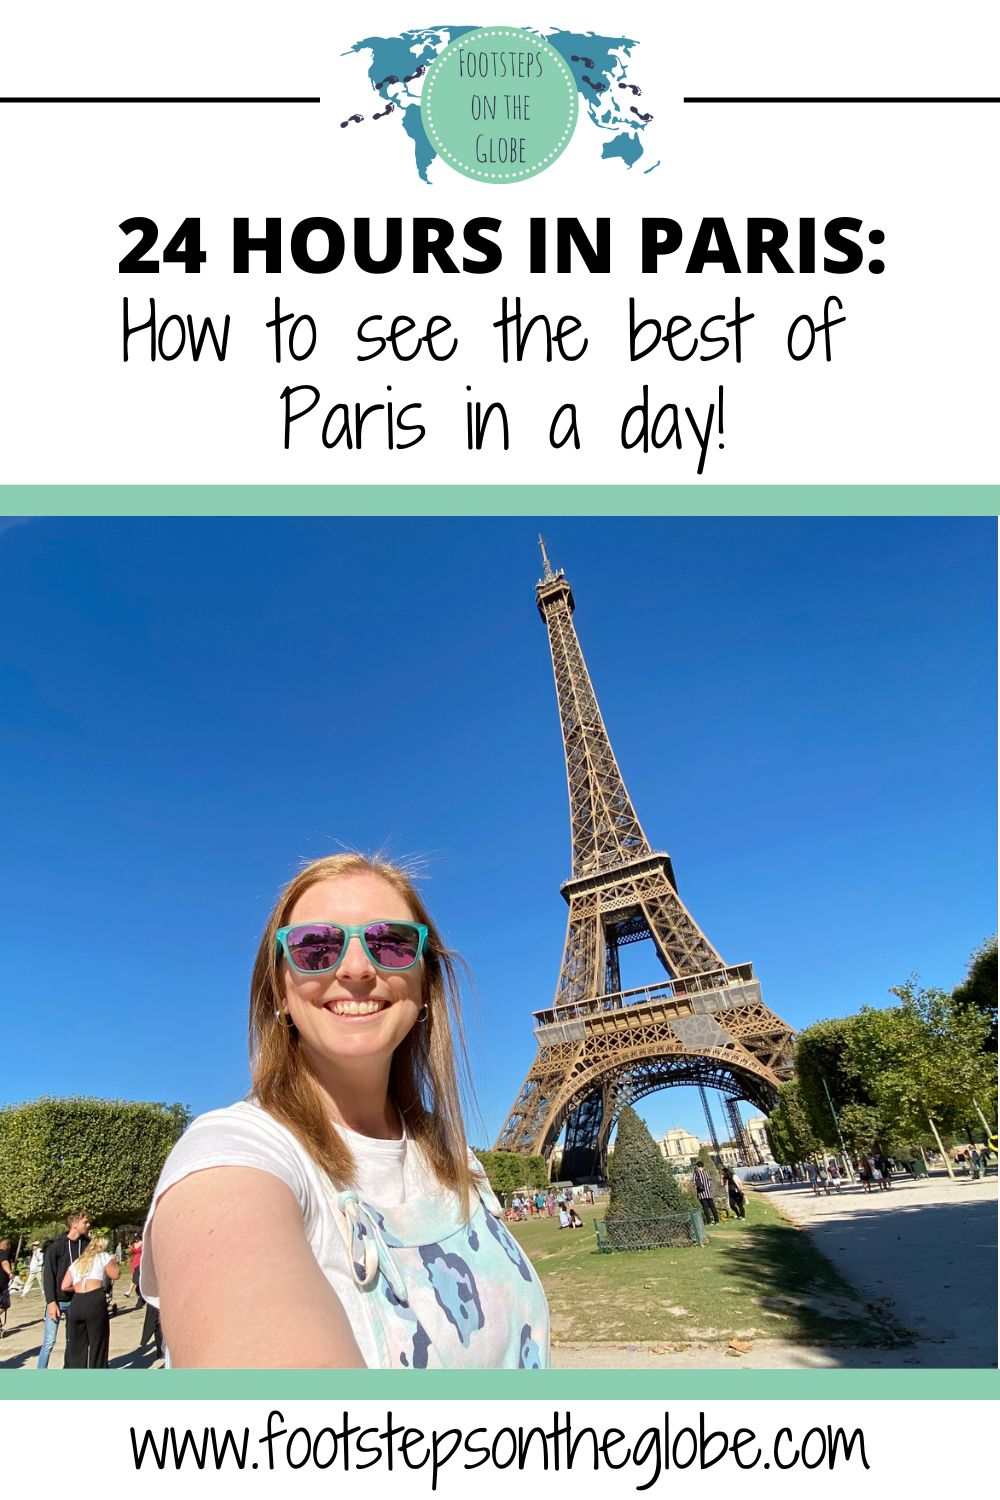 Mel taking a selfie wearing blue sunglasses in front of the eiffel tower on a sunny day with bright blue skies in Paris